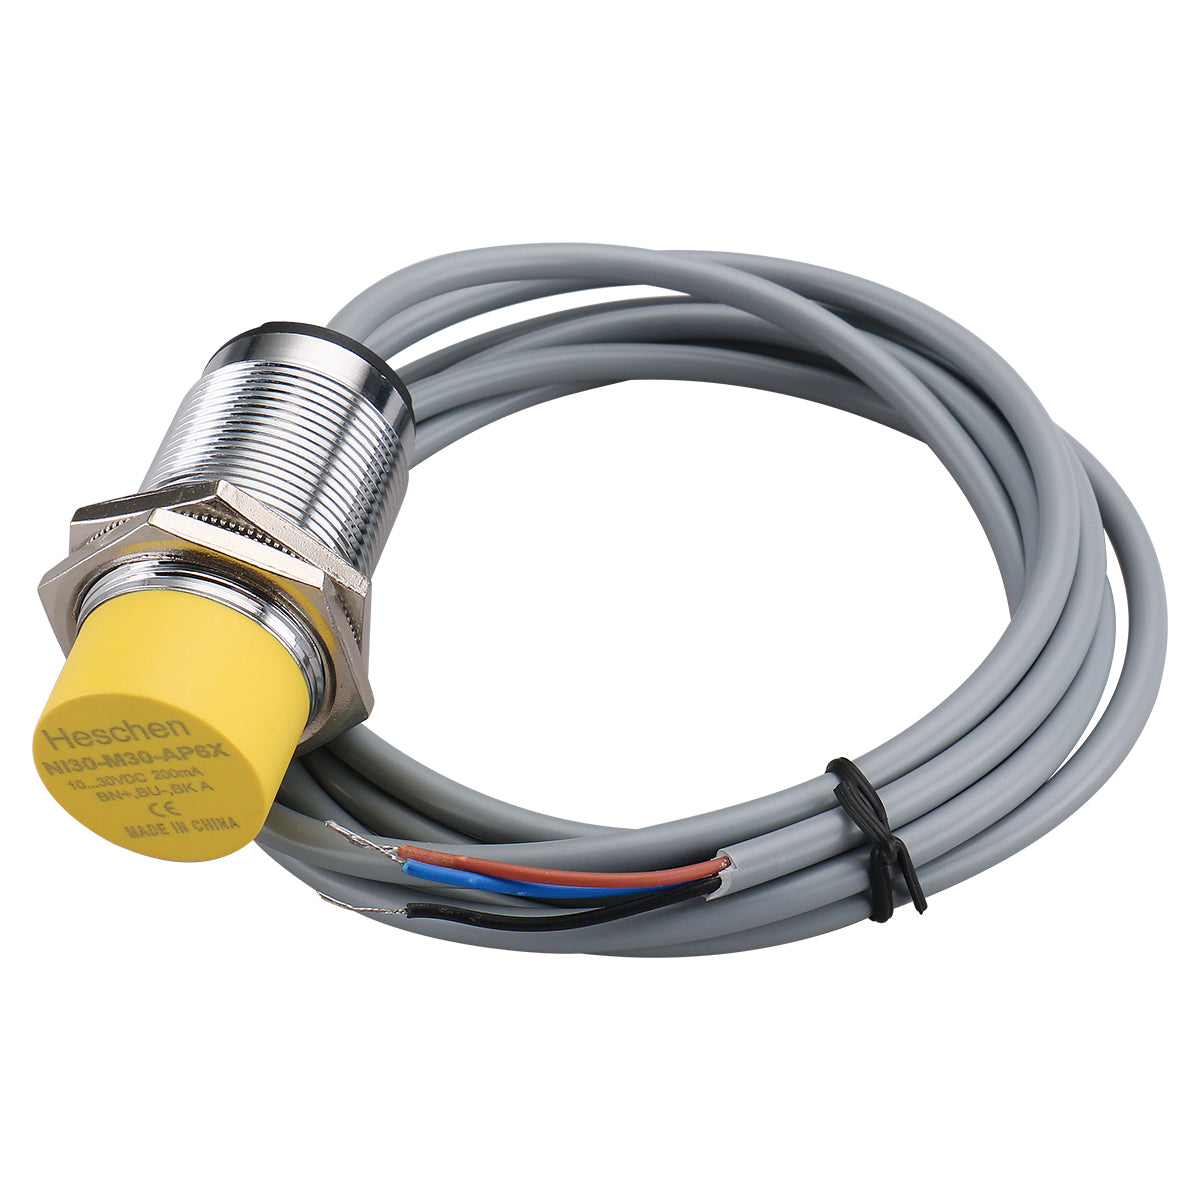 Heschen 30mm Non-embedded Inductive Sensor Switch Ni30-M30-AP6X Cylind